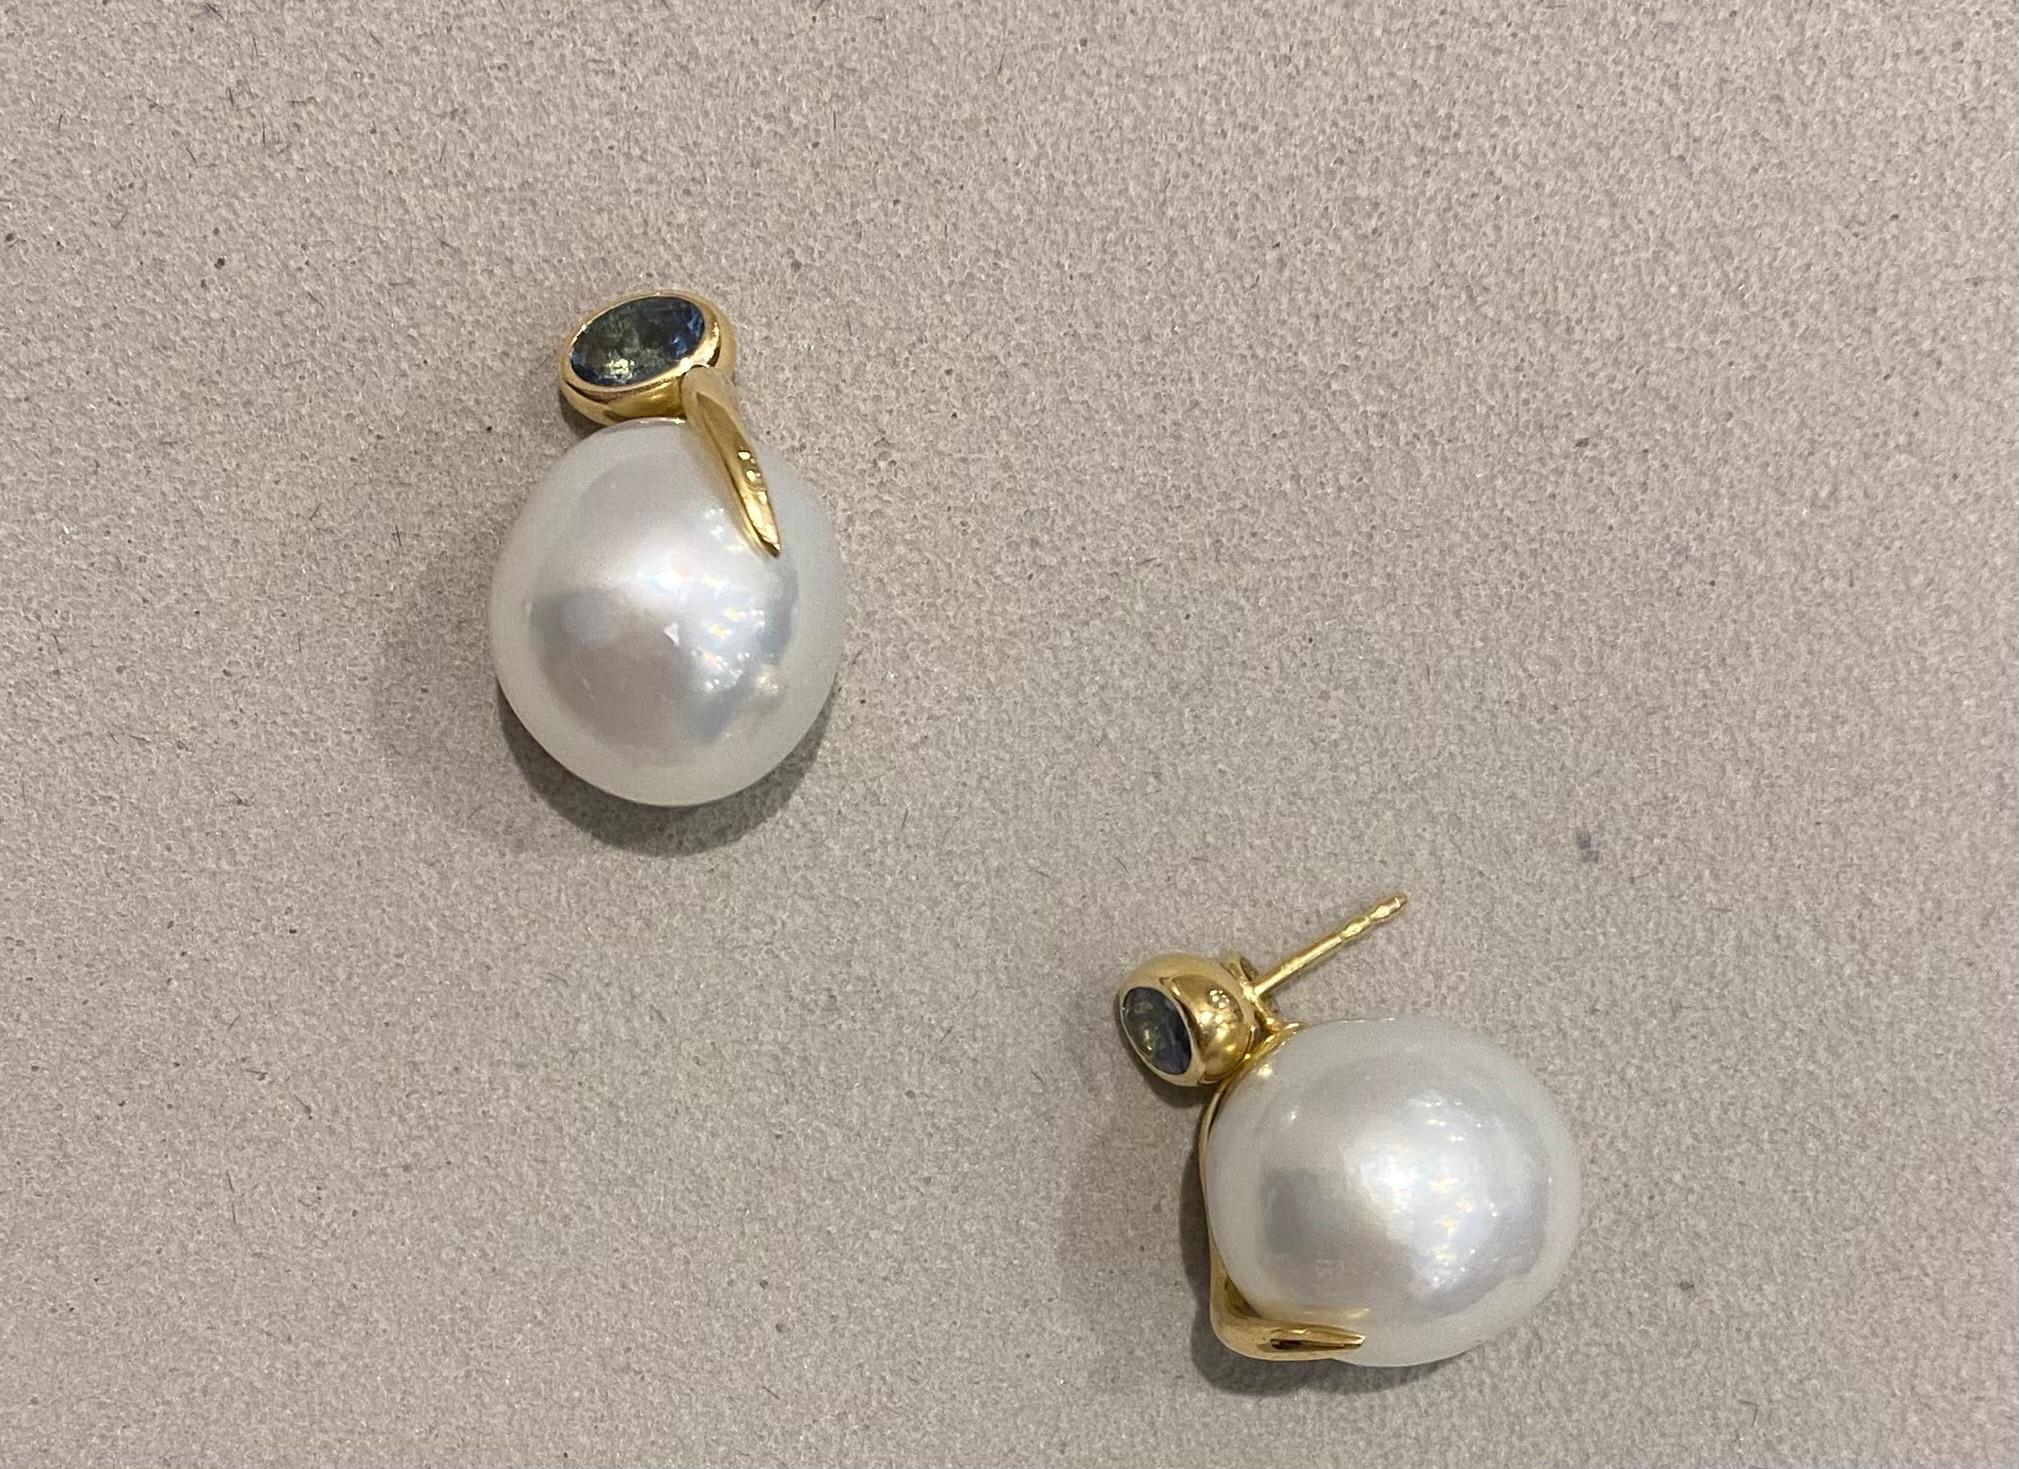 Oval Cut Lilly Hastedt South Sea Pearl and Aquamarine Earrings